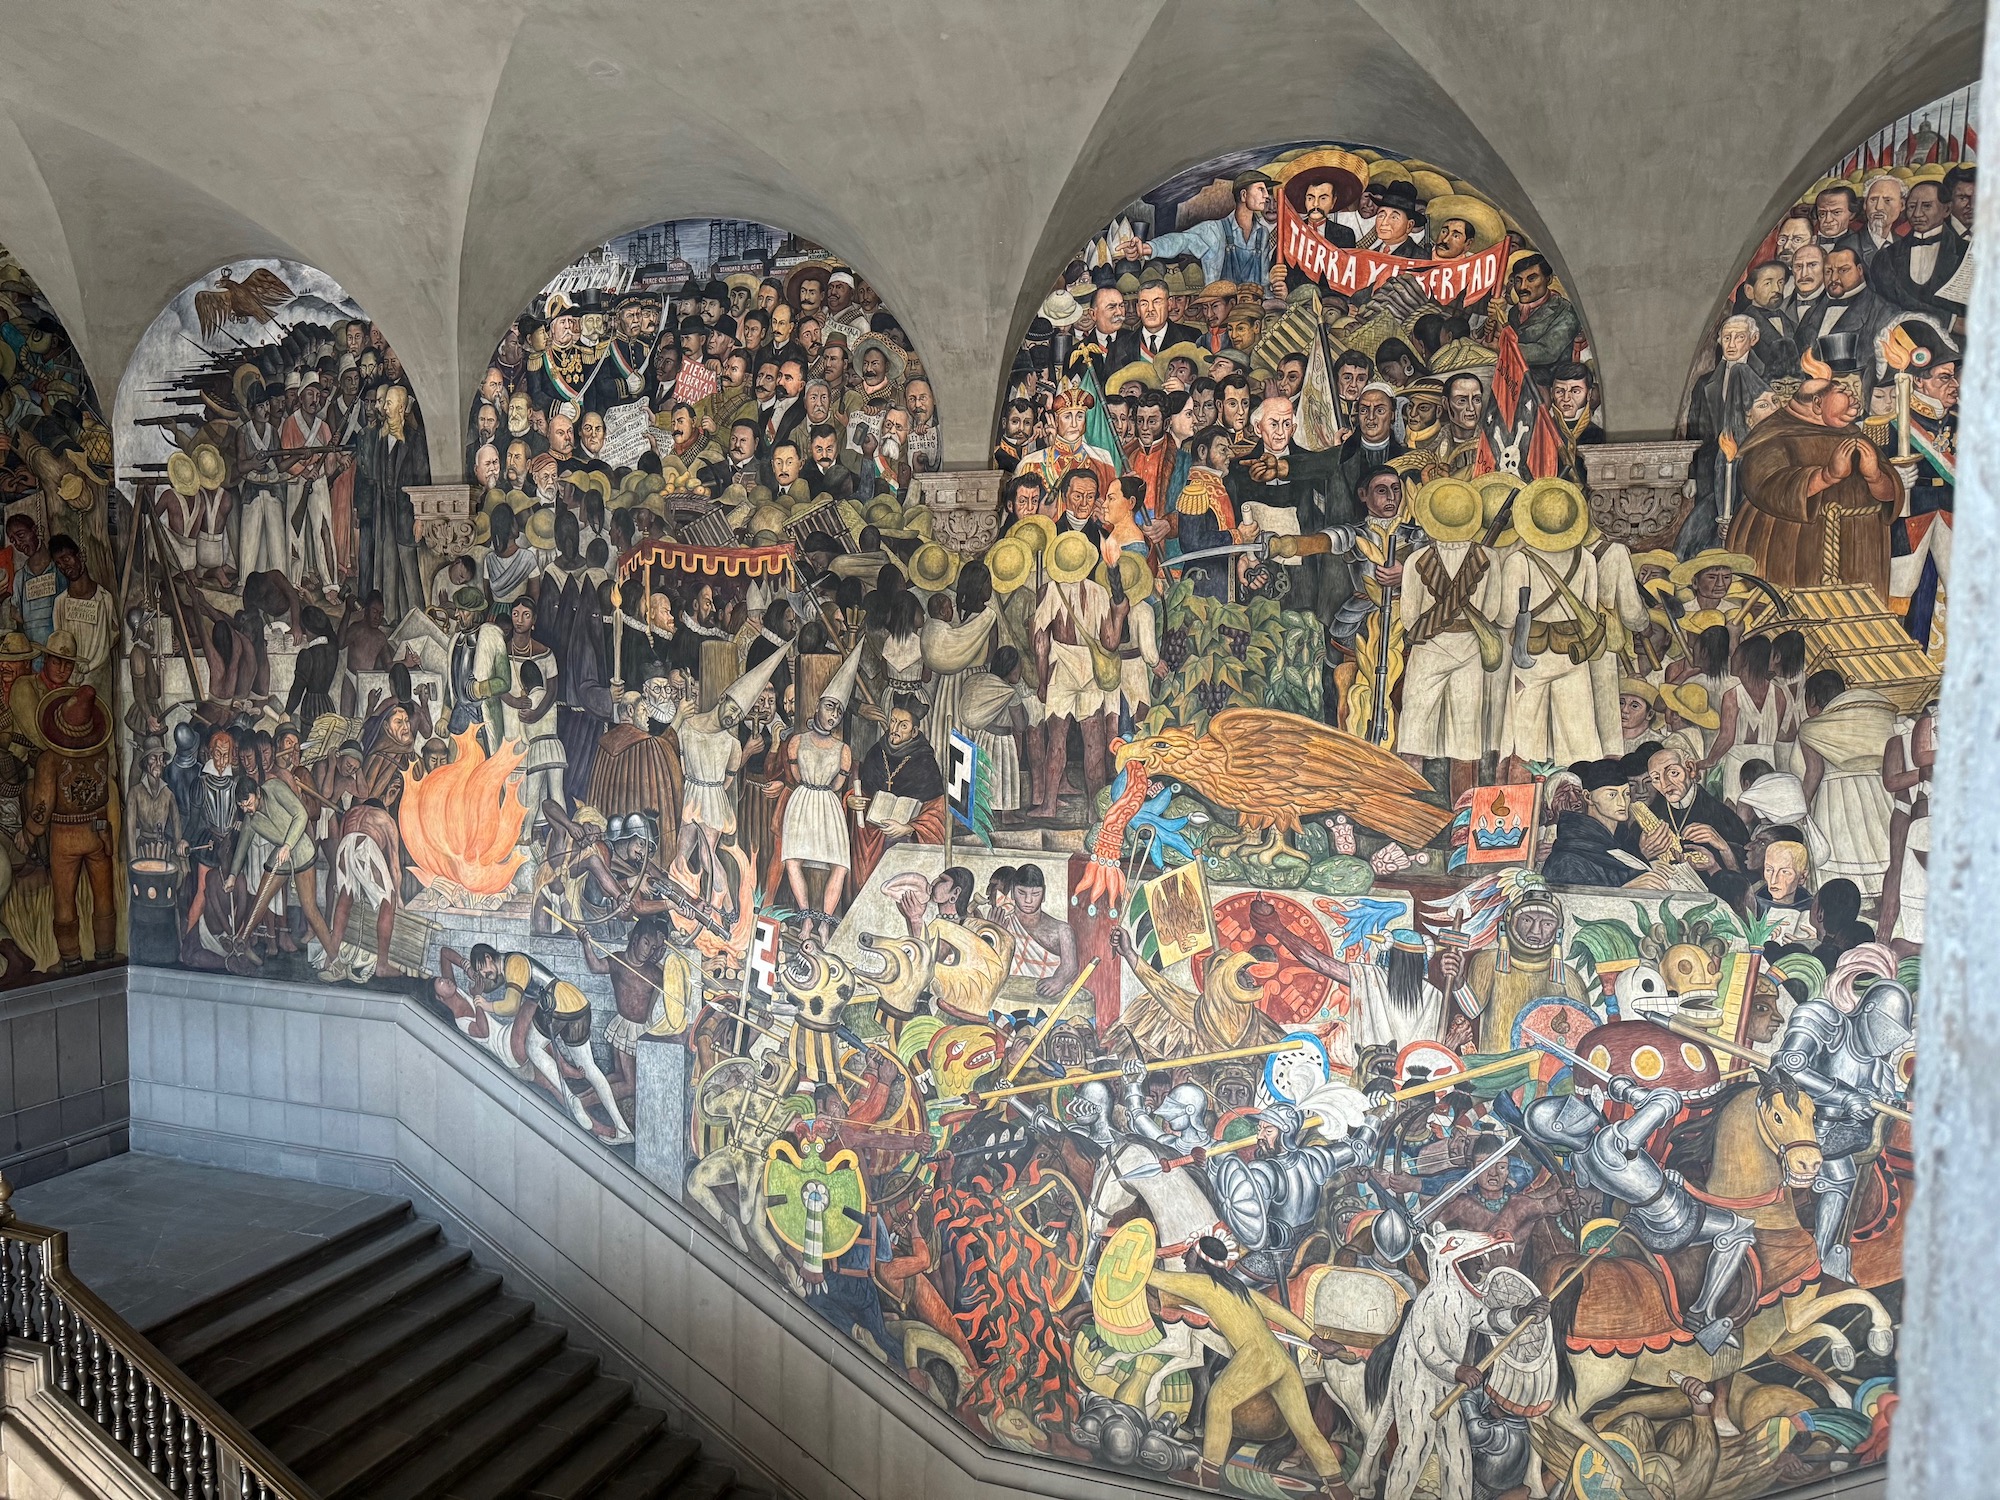 Part of the Diego Rivera mural, Mexico City